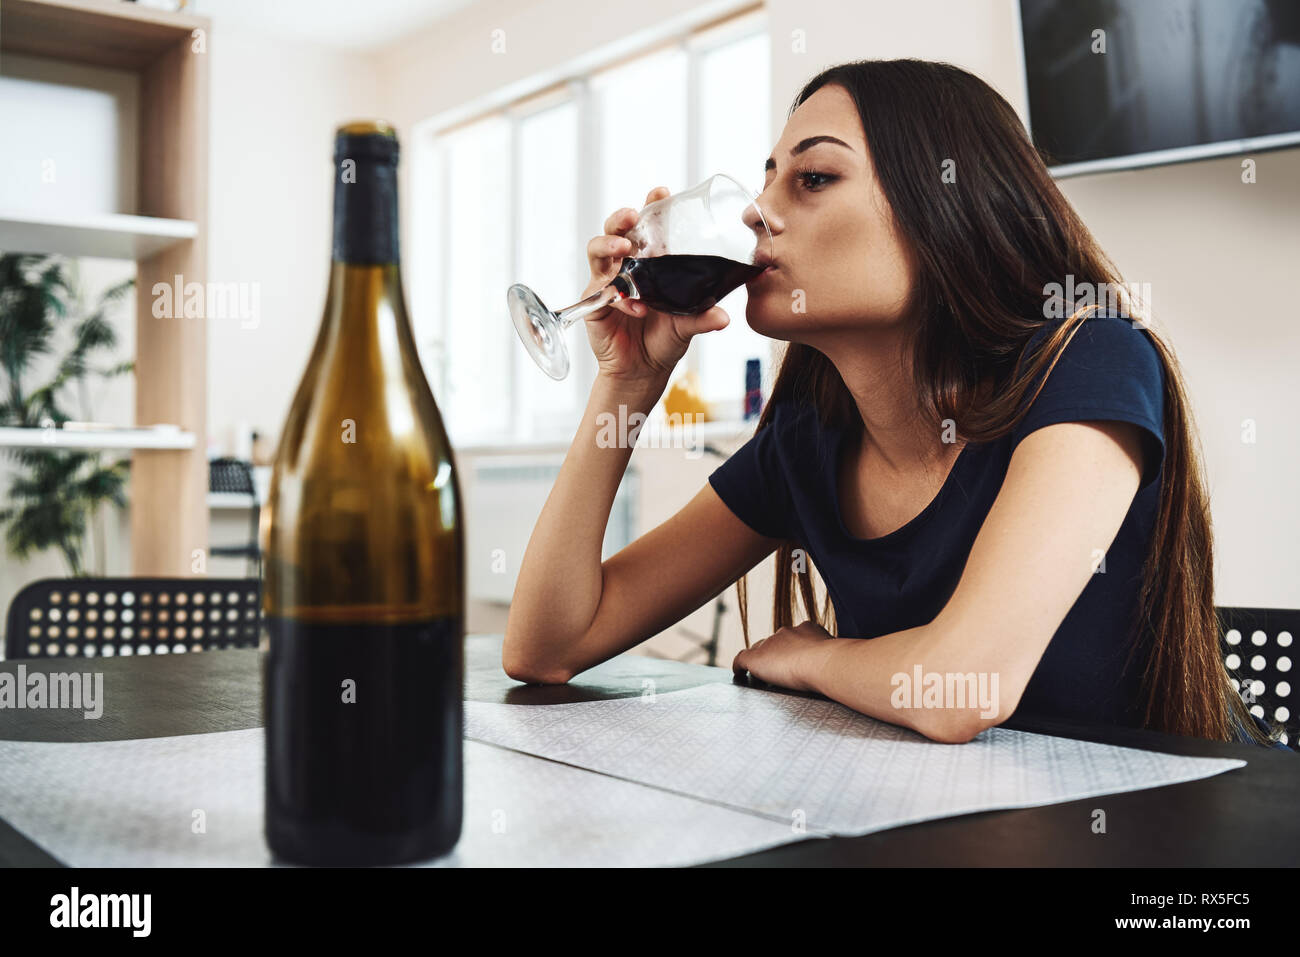 Depressed, divorced woman sitting alone in kitchen at home and drinking a glass of red wine because of problems at work and troubles in relationships. Stock Photo